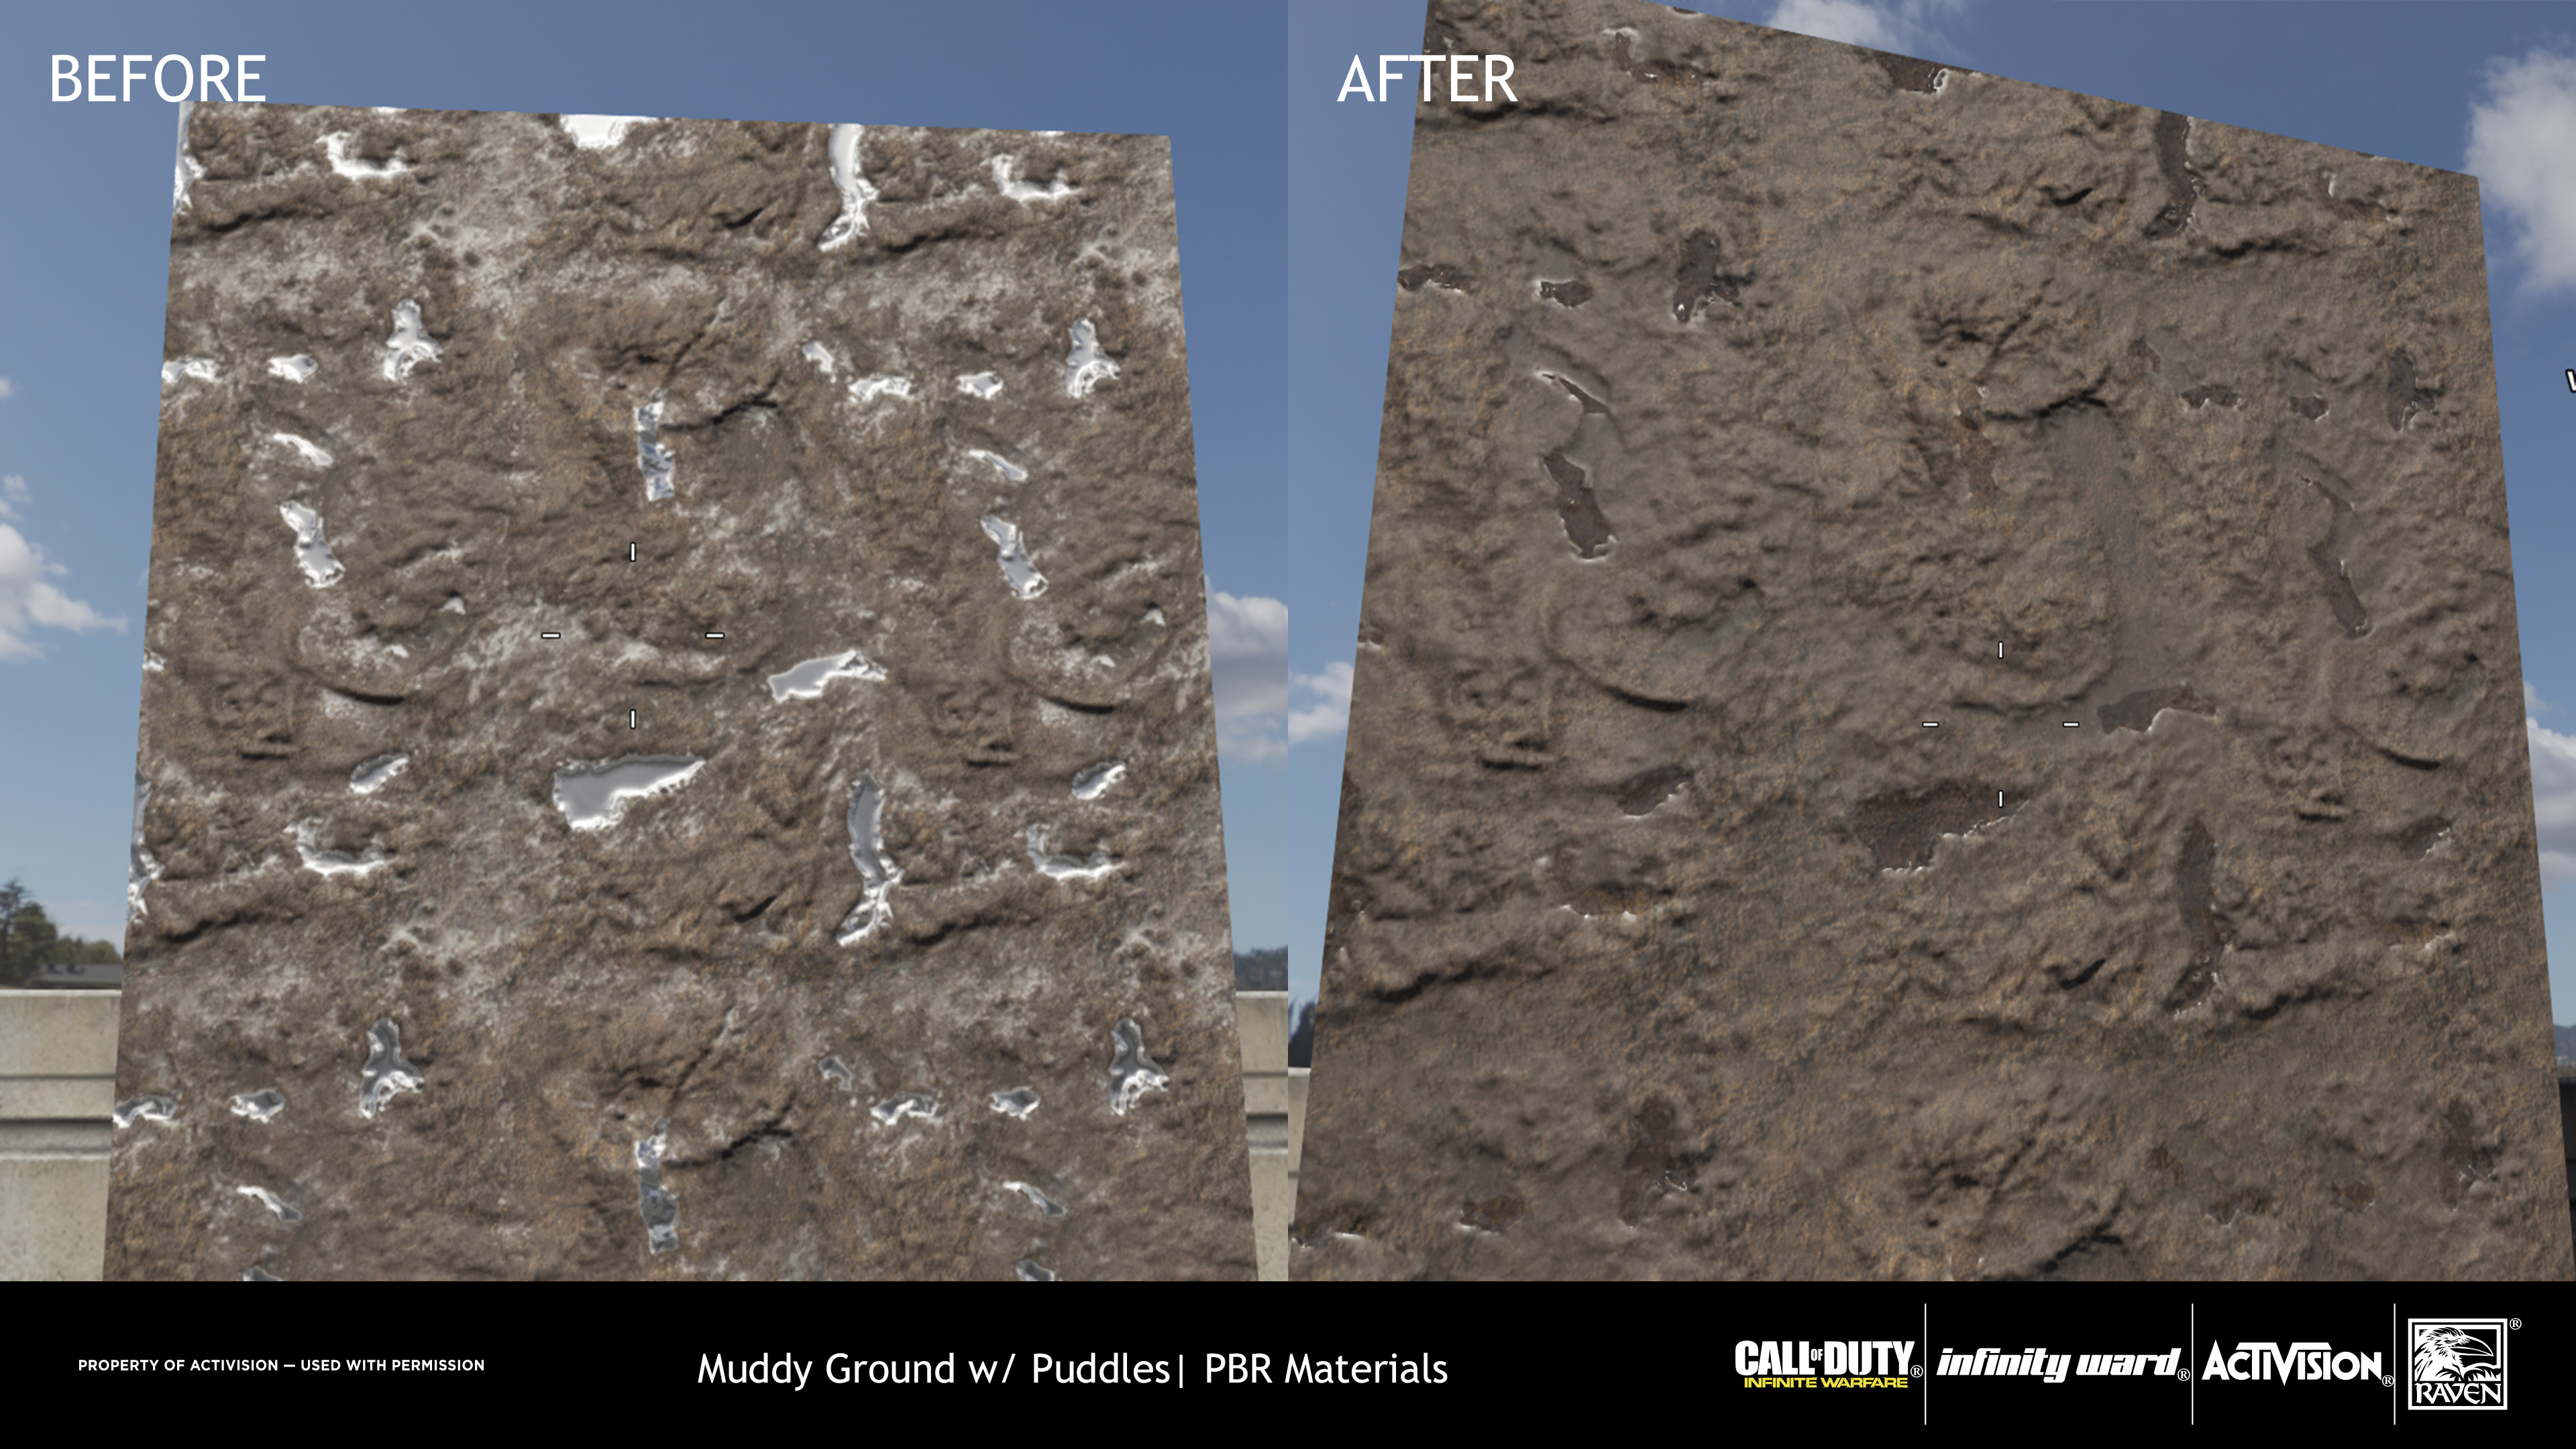 The values for the dirt were adjusted as well as the specular values for the puddles were adjusted to not appear as metallic. Diffuse was darkened in the puddles to affect porosity darkening.